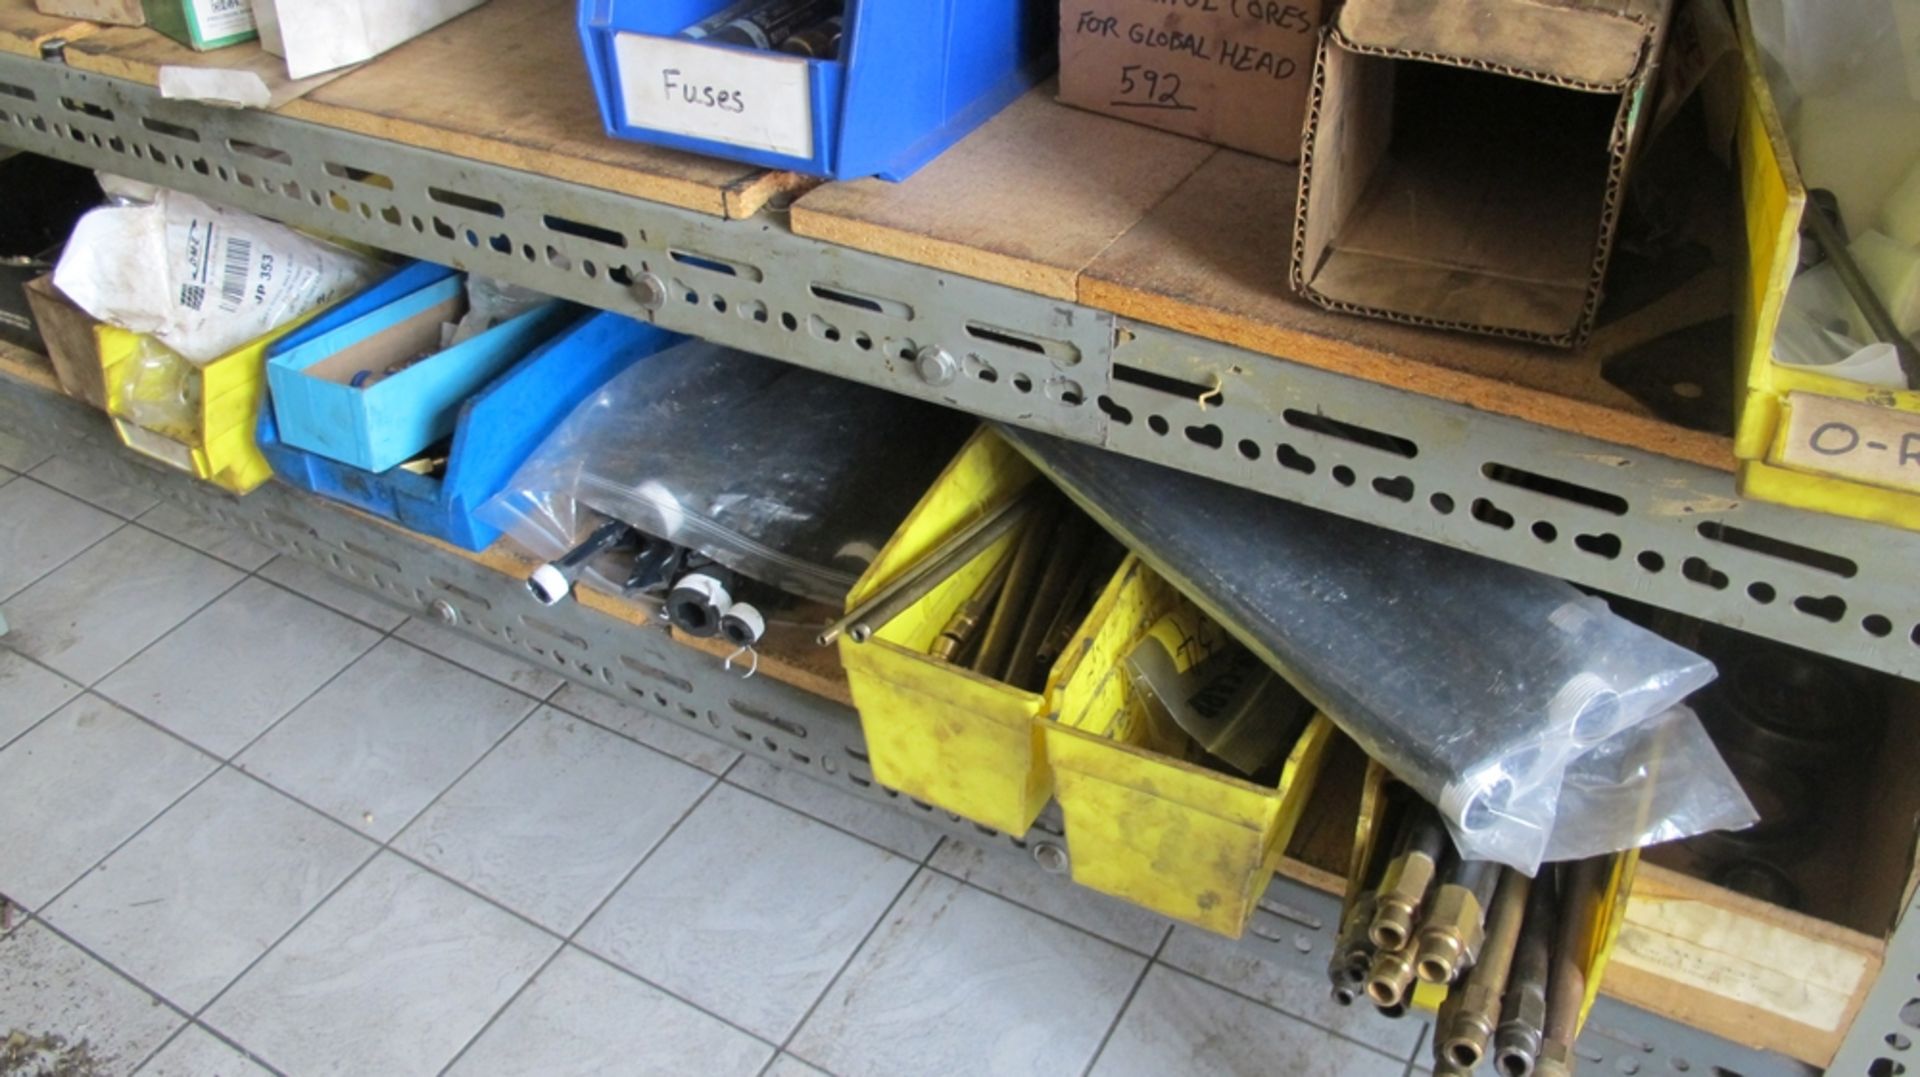 LOT OF (2) SECTIONS OF METAL SHELVING W/ CONTENTS, SHANKS, RADIUS GAUGES, FITTINGS, HARDWARE, ETC. - Image 8 of 8